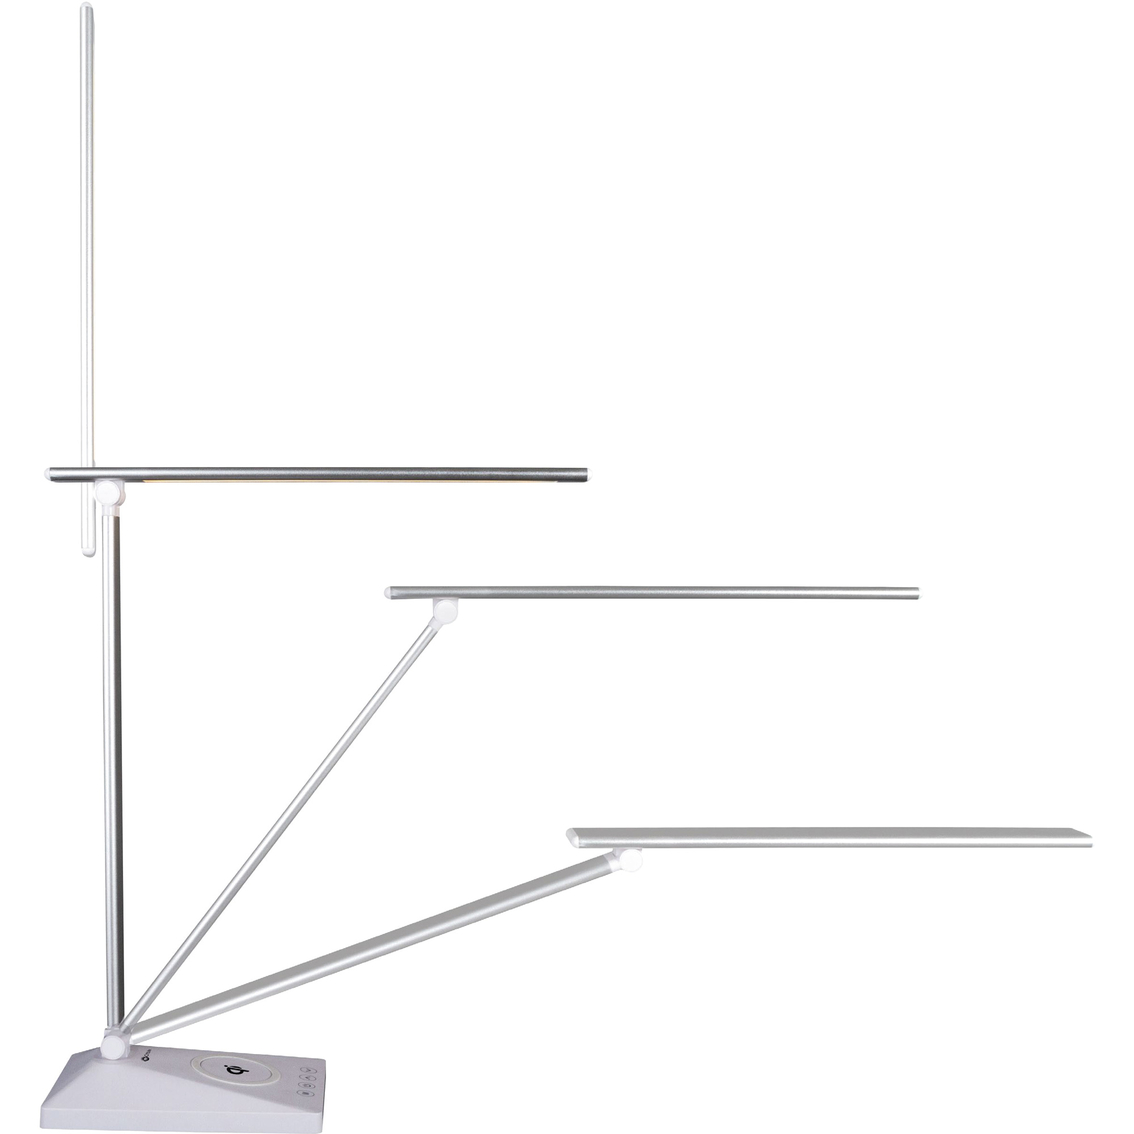 OttLite Entice LED Desk Lamp with Wireless Charging - Image 2 of 7